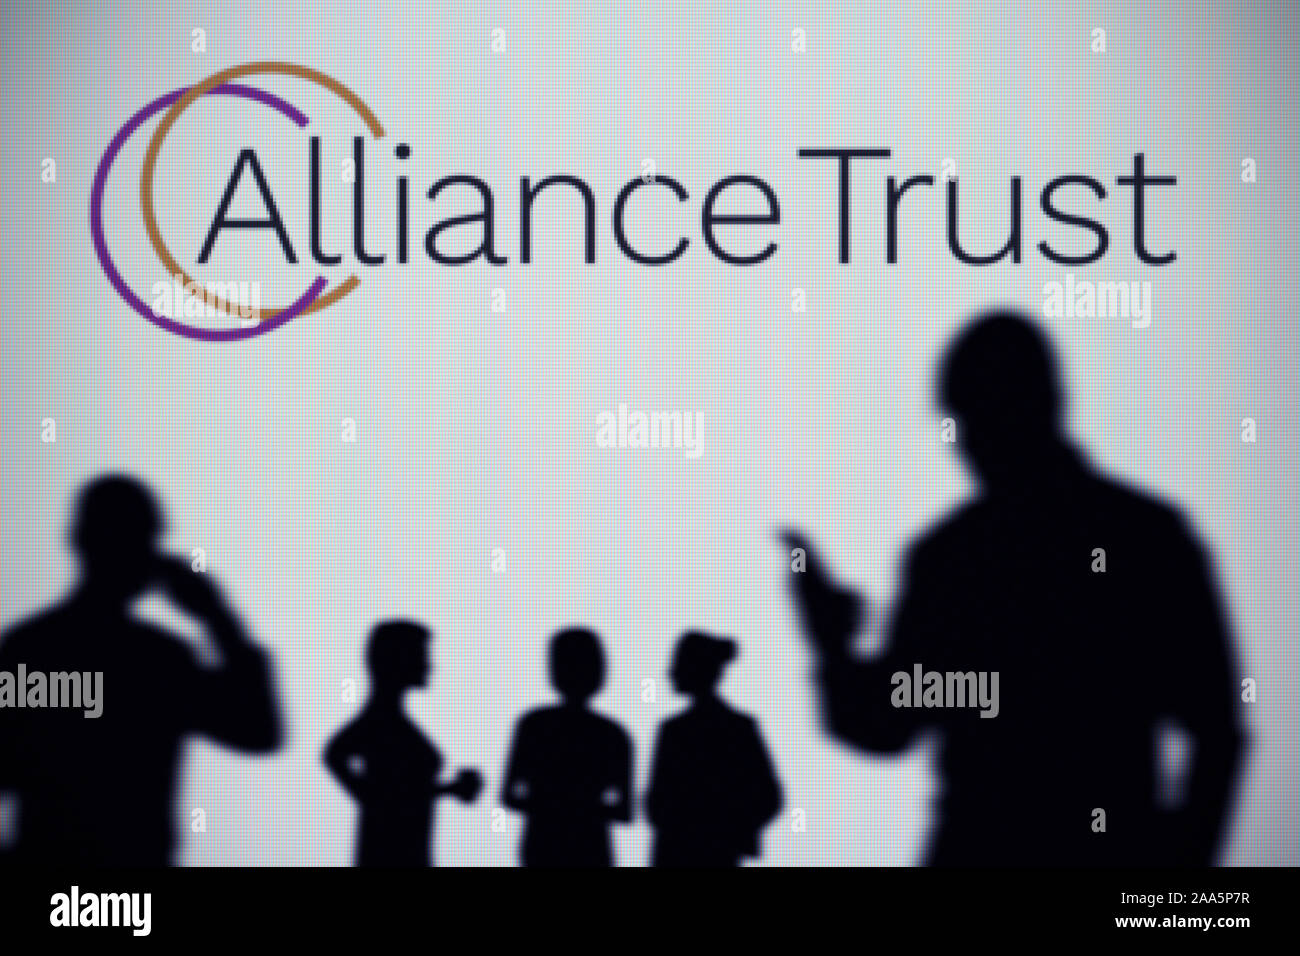 The Alliance Trust logo is seen on an LED screen in the background while a silhouetted person uses a smartphone (Editorial use only) Stock Photo